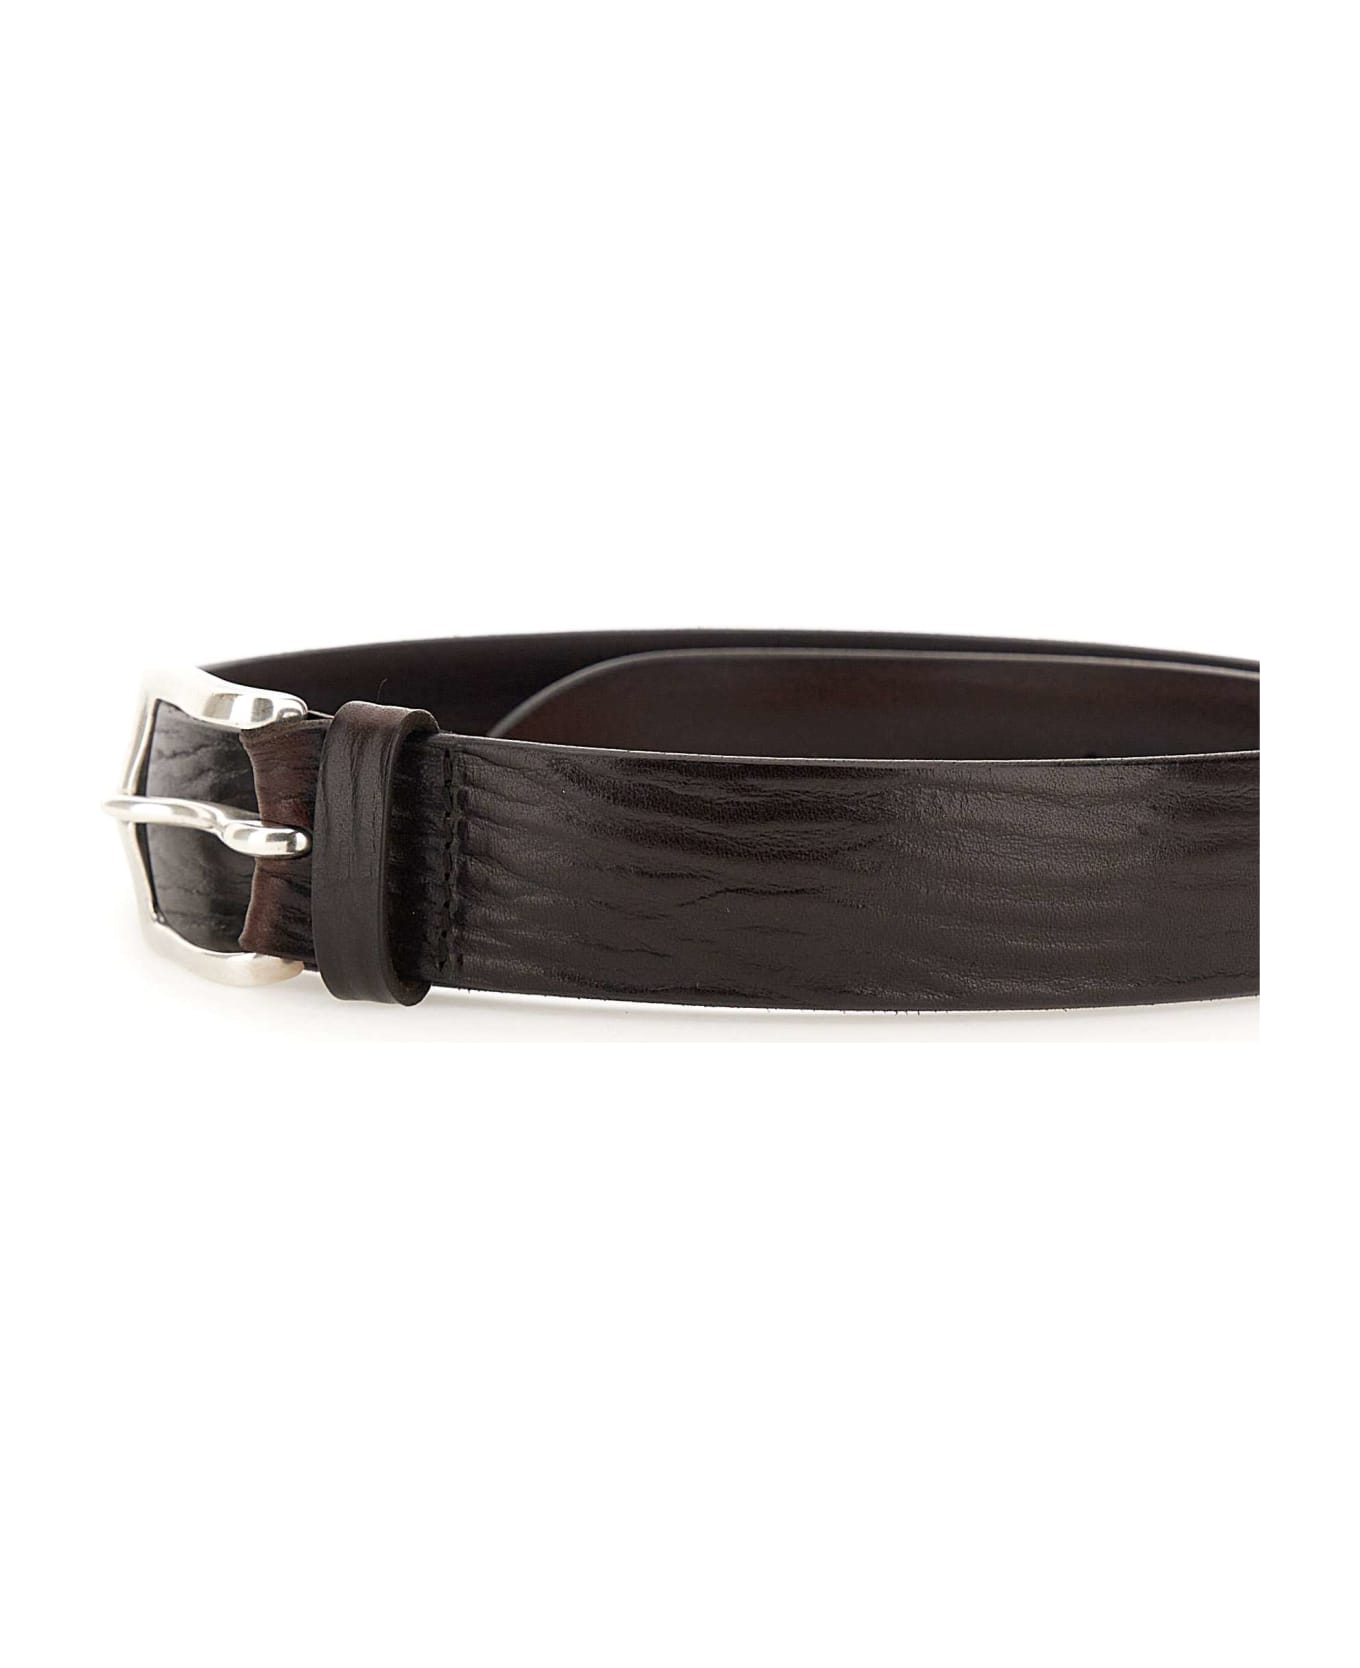 Orciani "blade" Leather Belt - BROWN ベルト